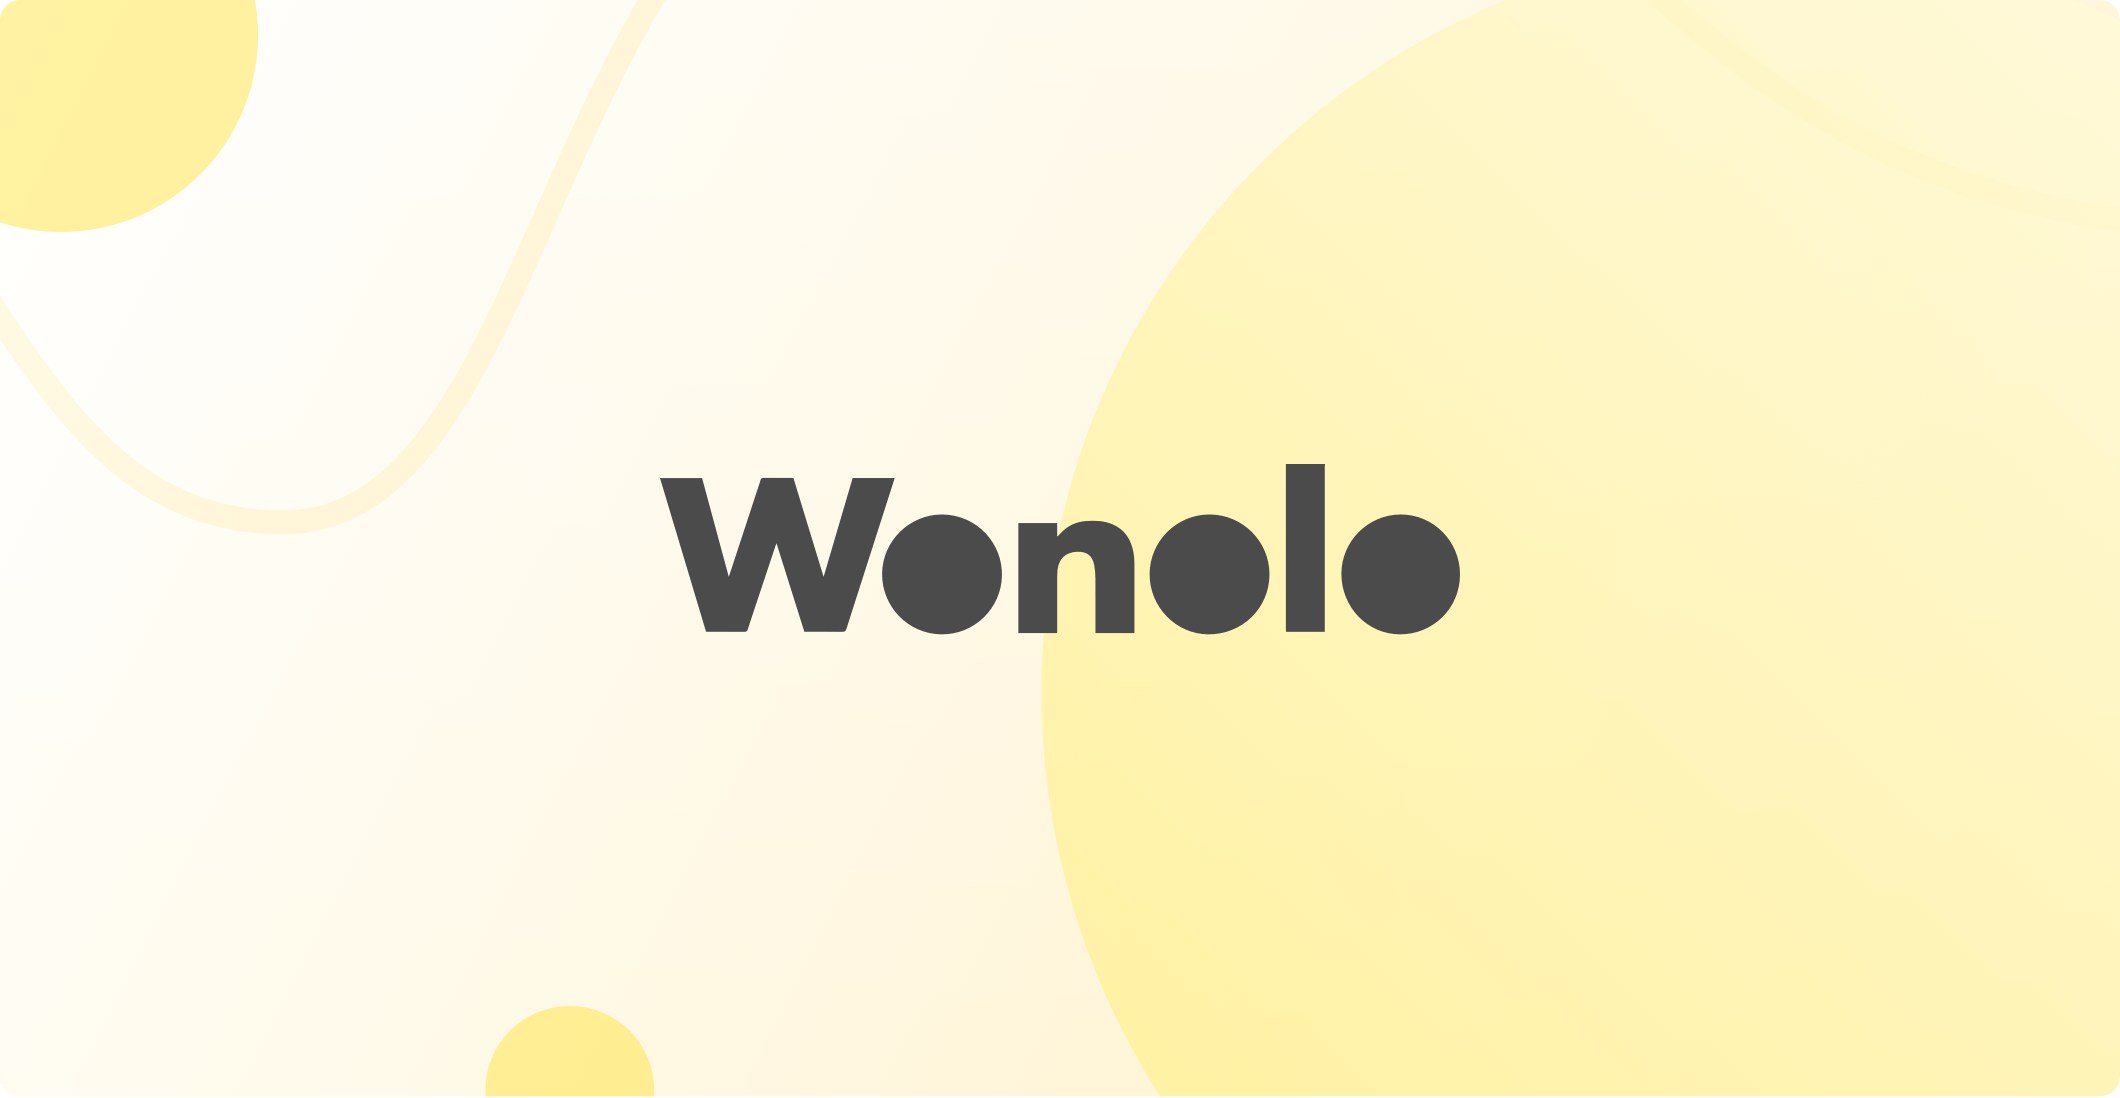 Your Guide to Warehouse Terms - Wonolo